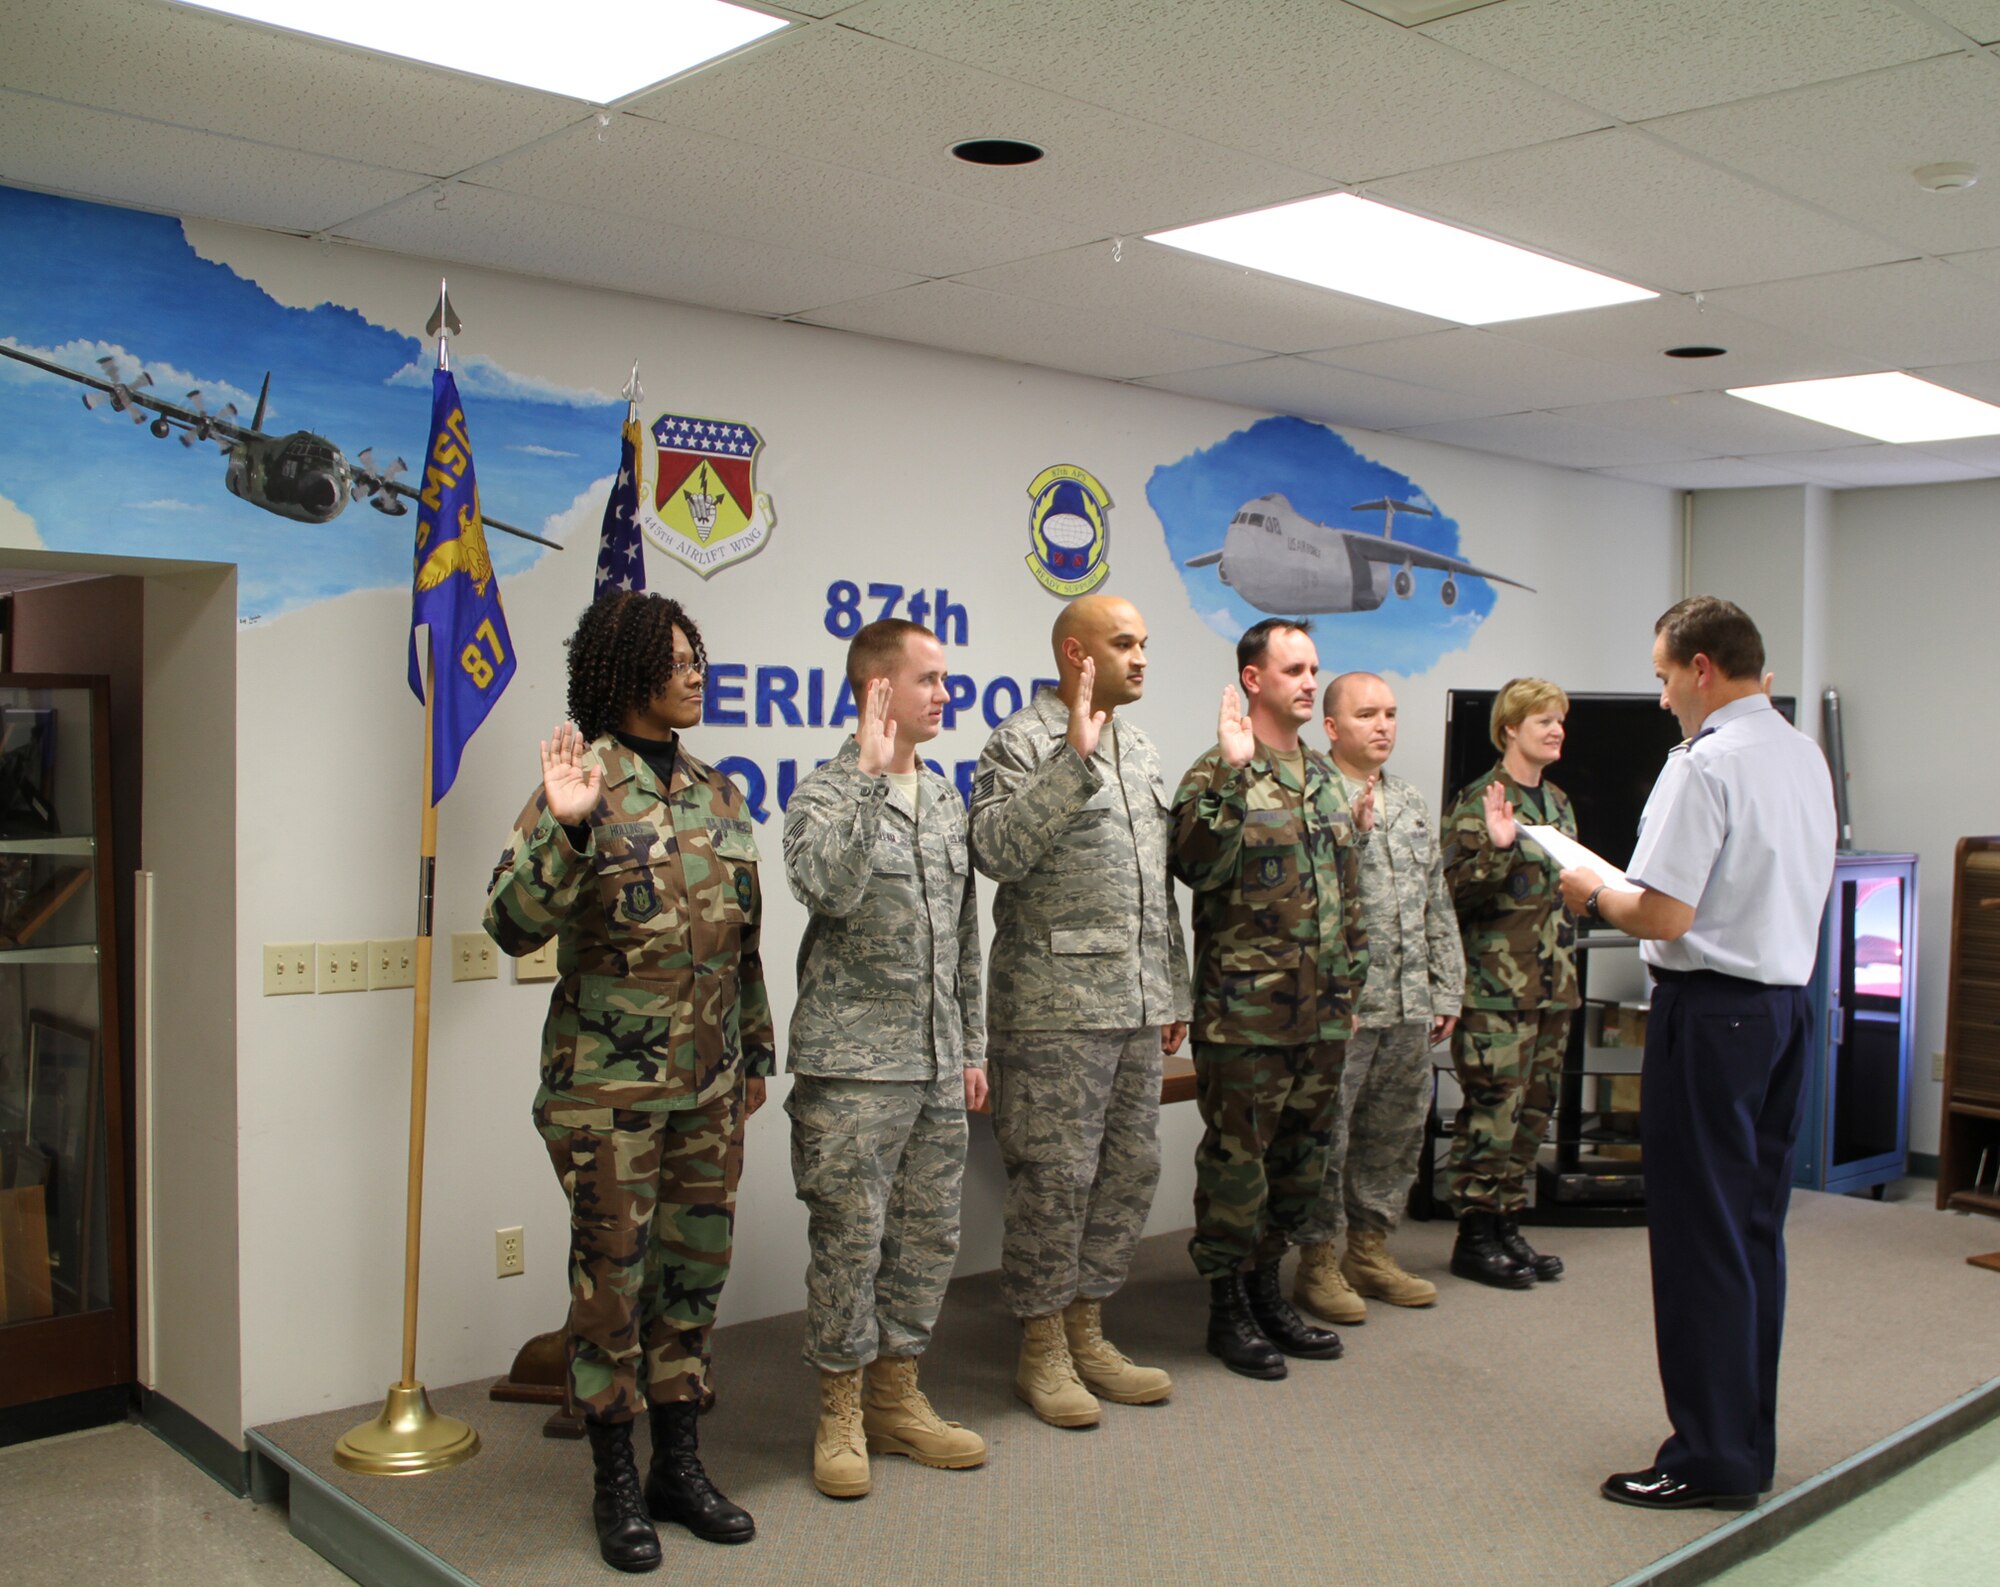 WRIGHT-PATTERSON AIR FORCE BASE, Ohio – Maj. David Mohr, 87th Aerial Port Squadron commander, administers the Oath of Enlistment to six reservists in his unit during a reenlistment ceremony held during the unit training assembly Nov. 22.  From left to right; Staff Sgt. Jawahna Hollins; Staff Sgt. Matthew Hallam; Tech. Sgt. Cleve Samuel, III;  Master Sgt. Tracy Woyat; Staff Sgt. David Kalb; Tech. Sgt. Linda Thrasher. (U. S. Air Force photo/Tech. Sgt. William Castle)